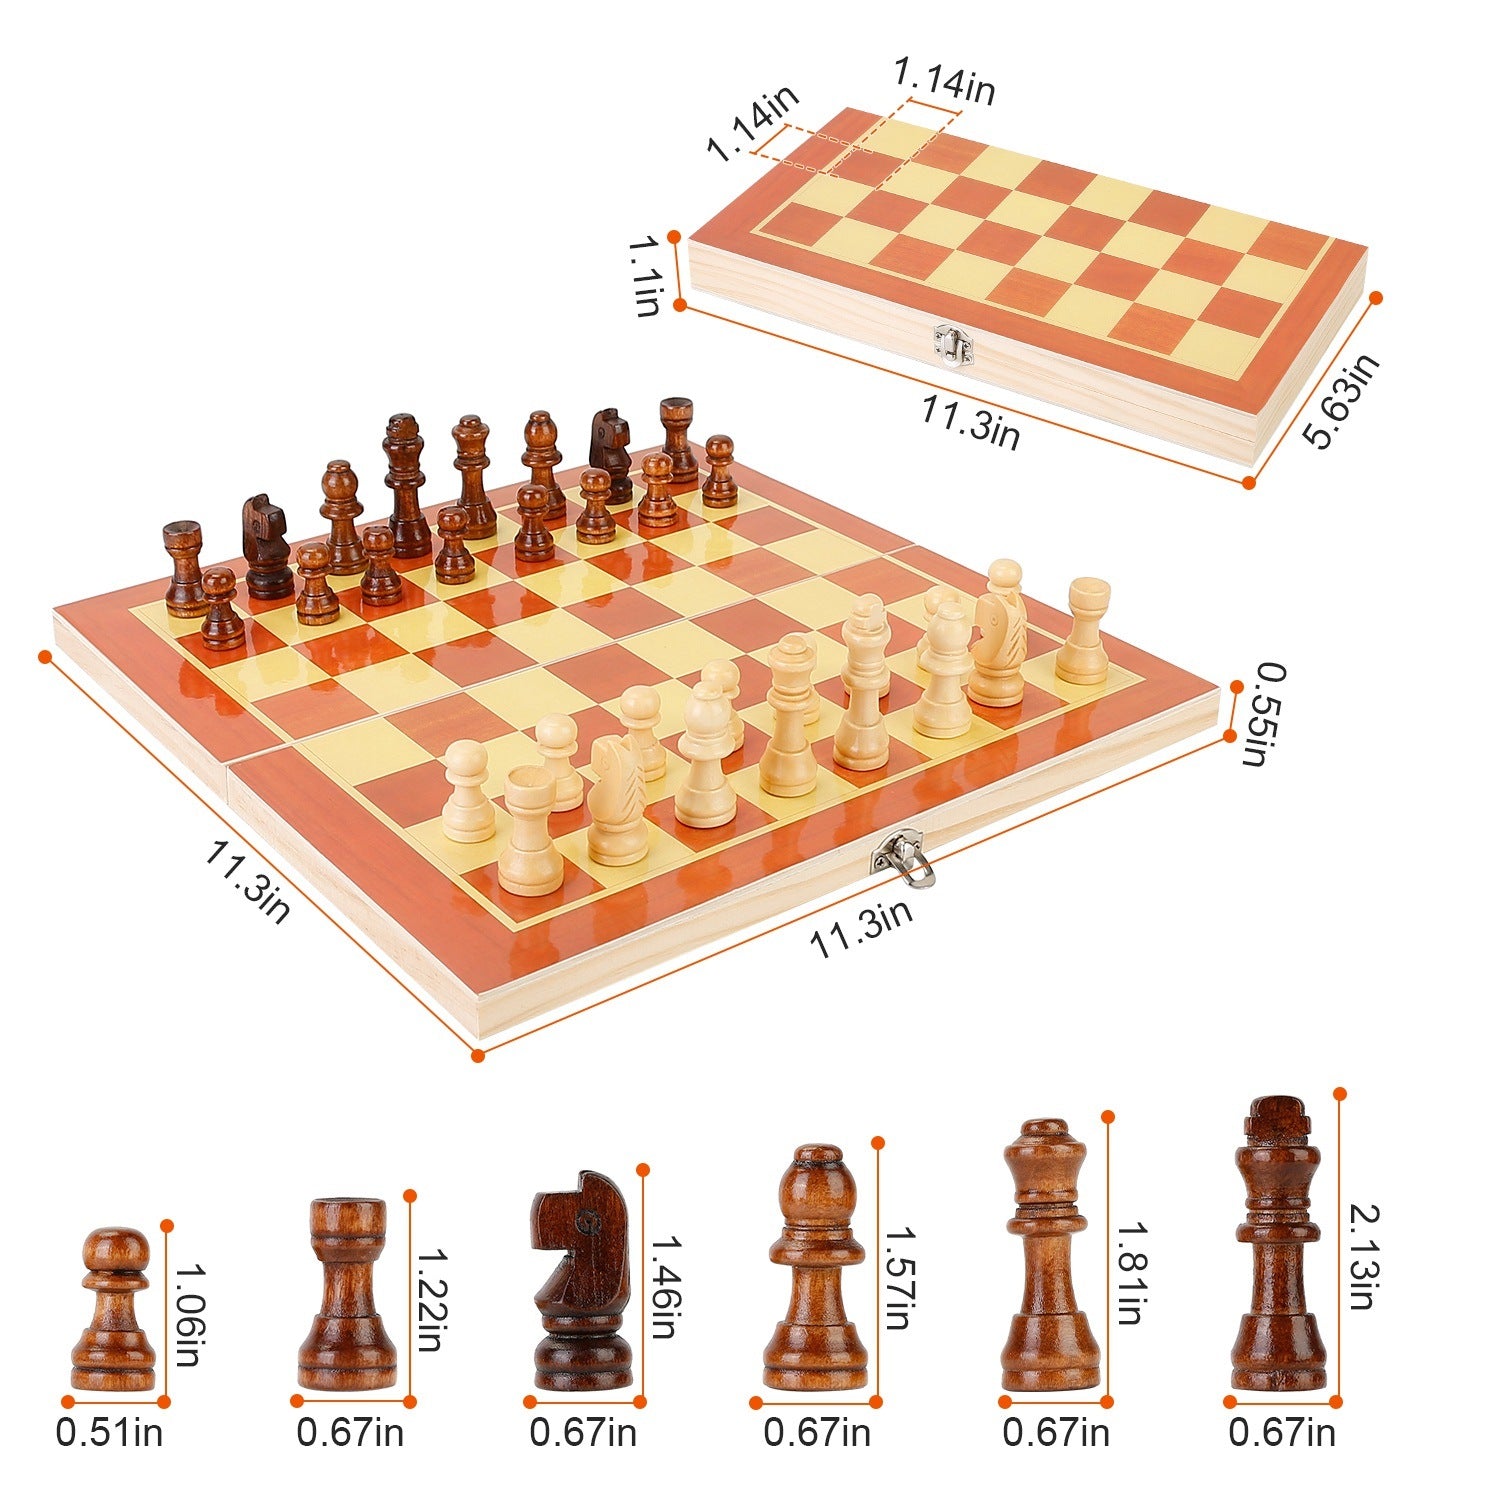 A Folding Board Game Set Portable Travel Wooden Chess Set with Wooden Crafted Pieces Chessmen Storage Box on a white background.